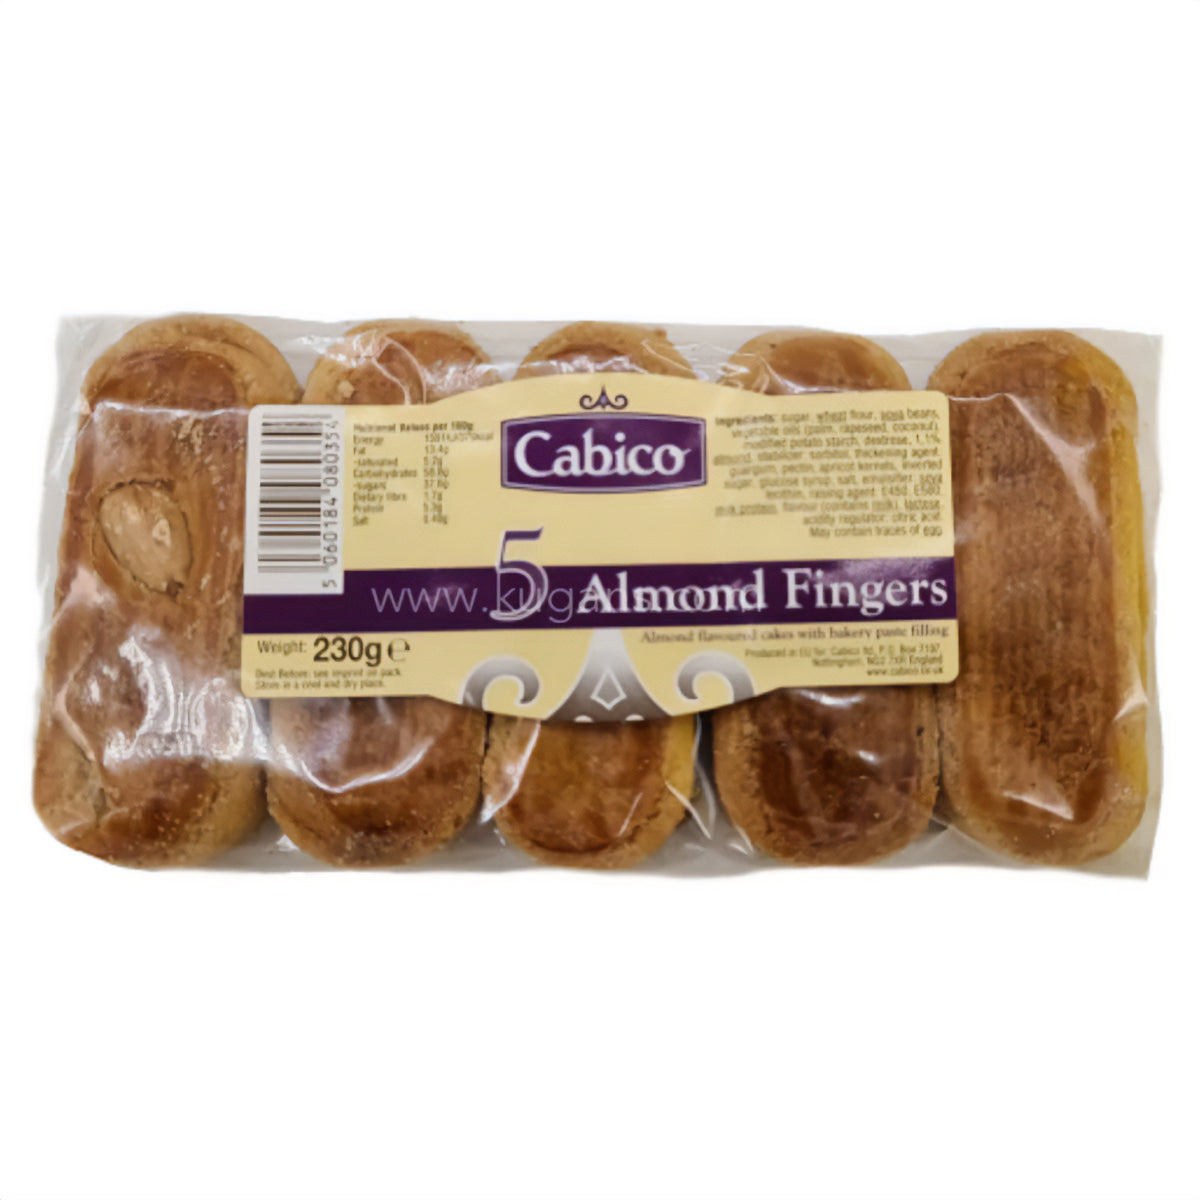 Cabico almond fingers in a package.